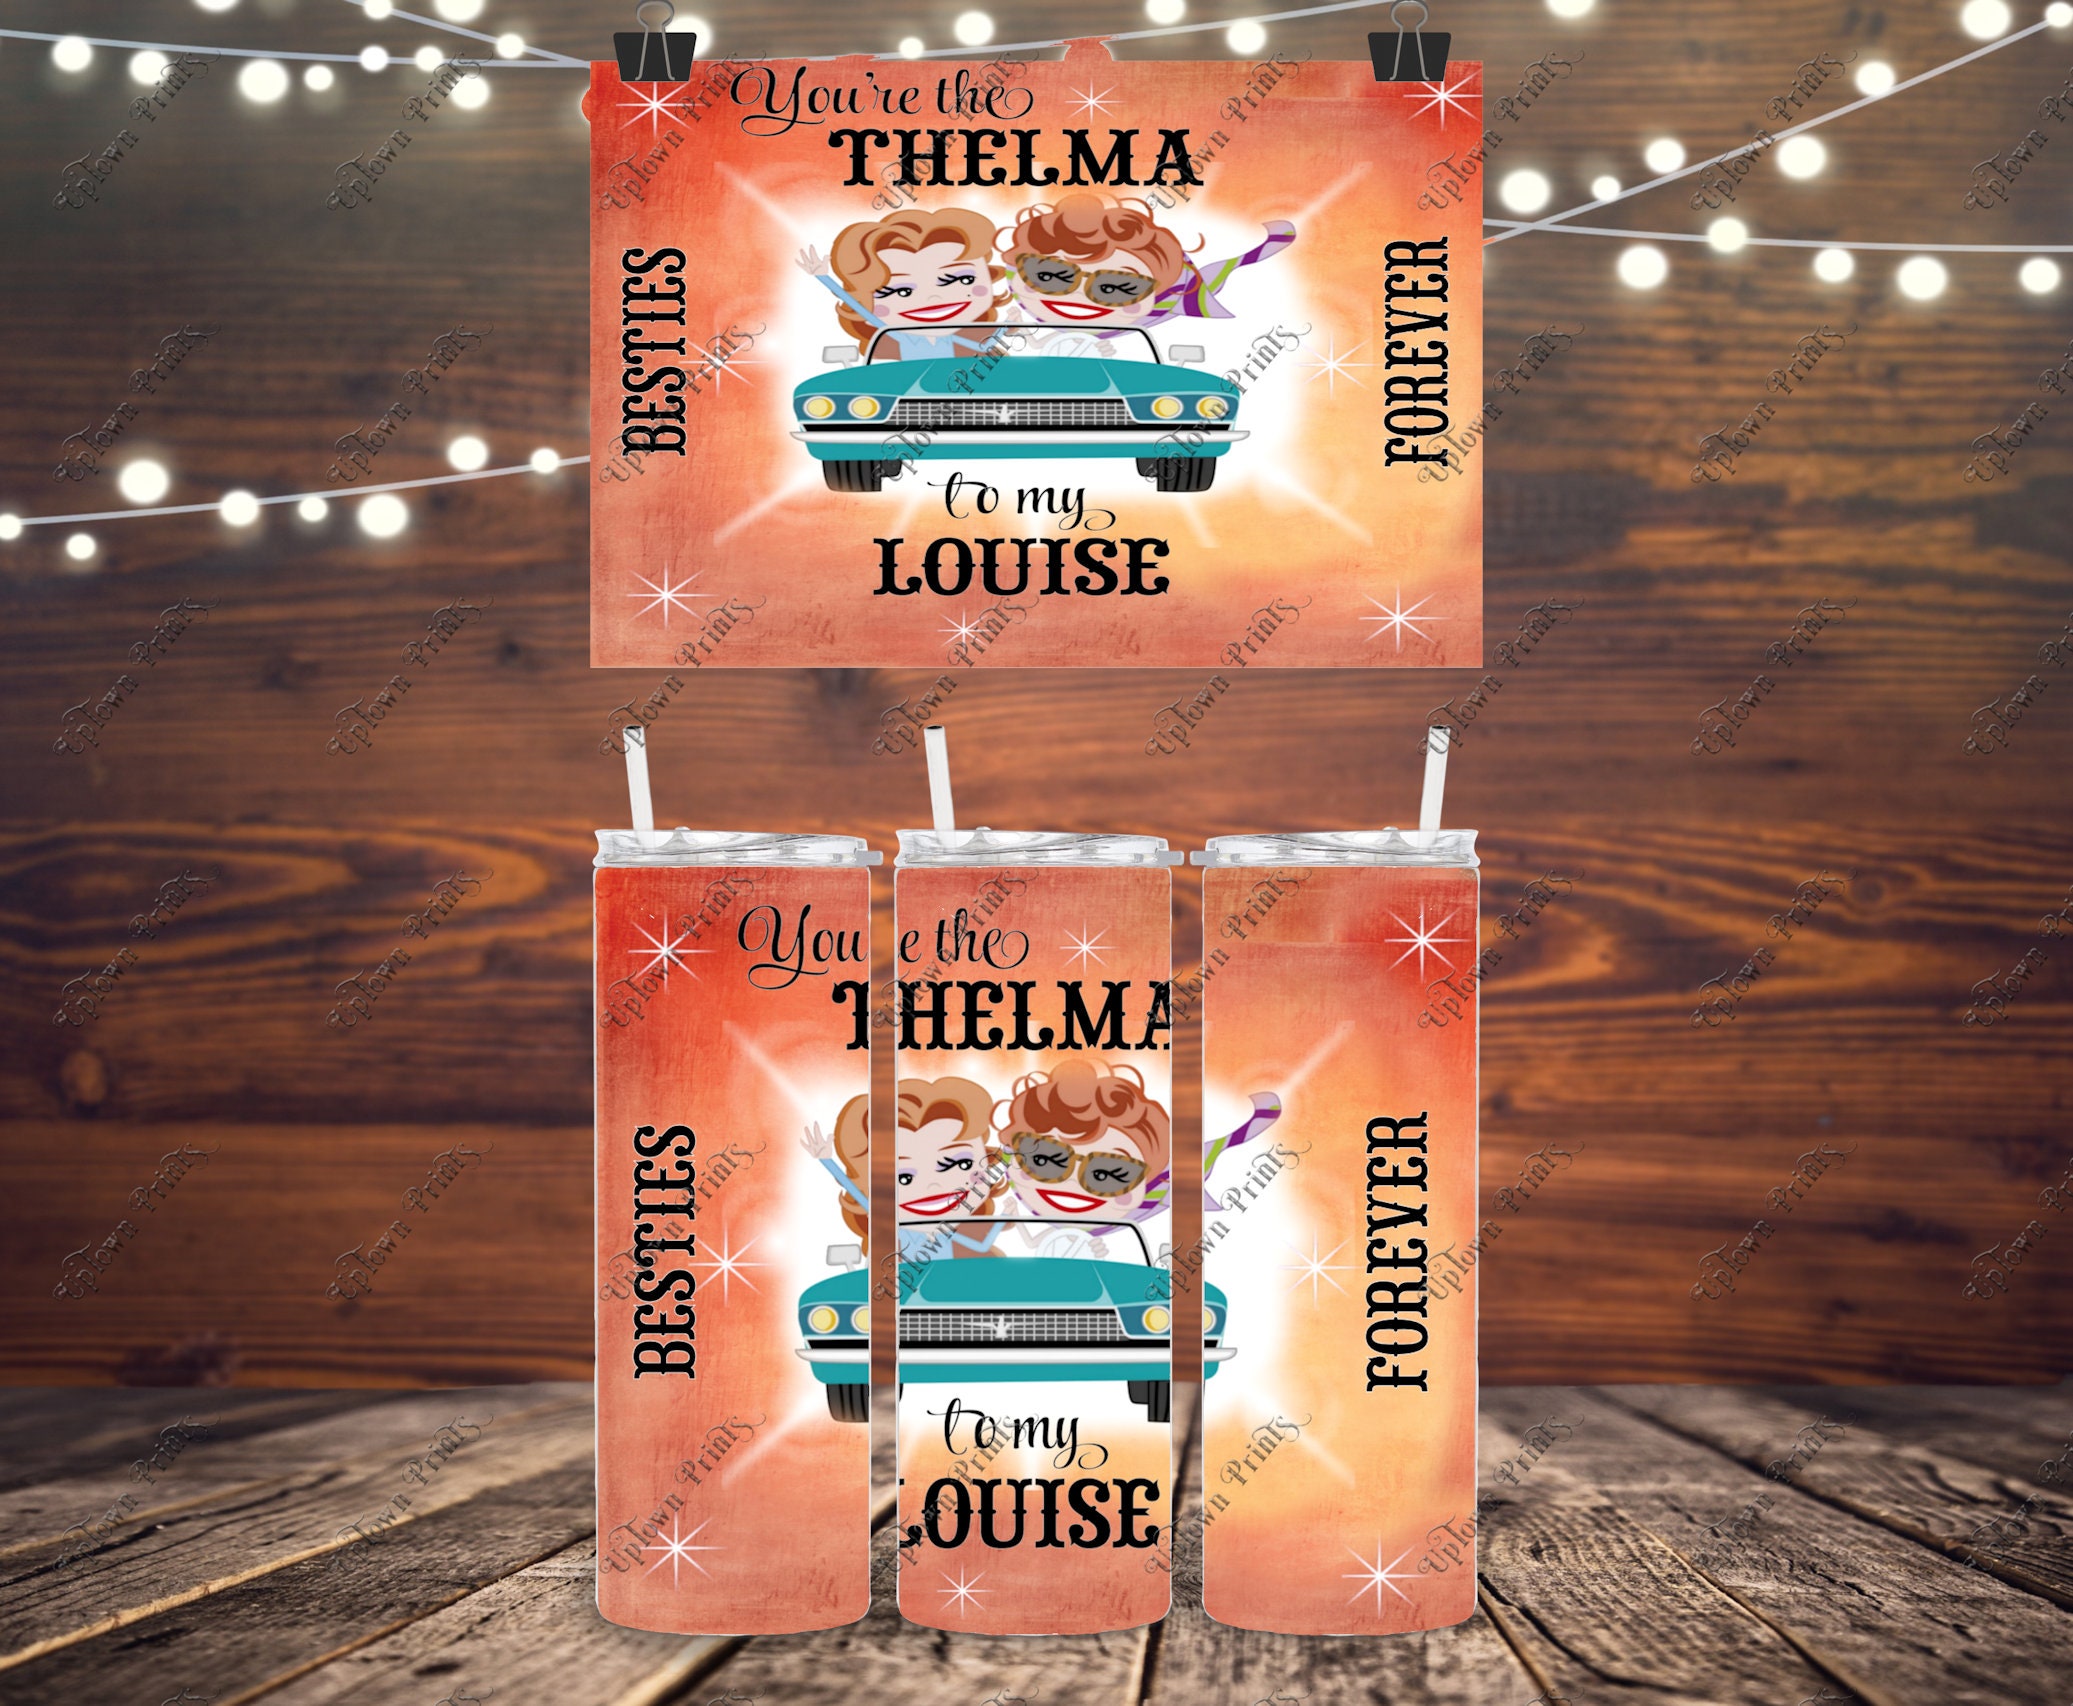 Thelma & Louise ♥ - Finders Keepers Creations